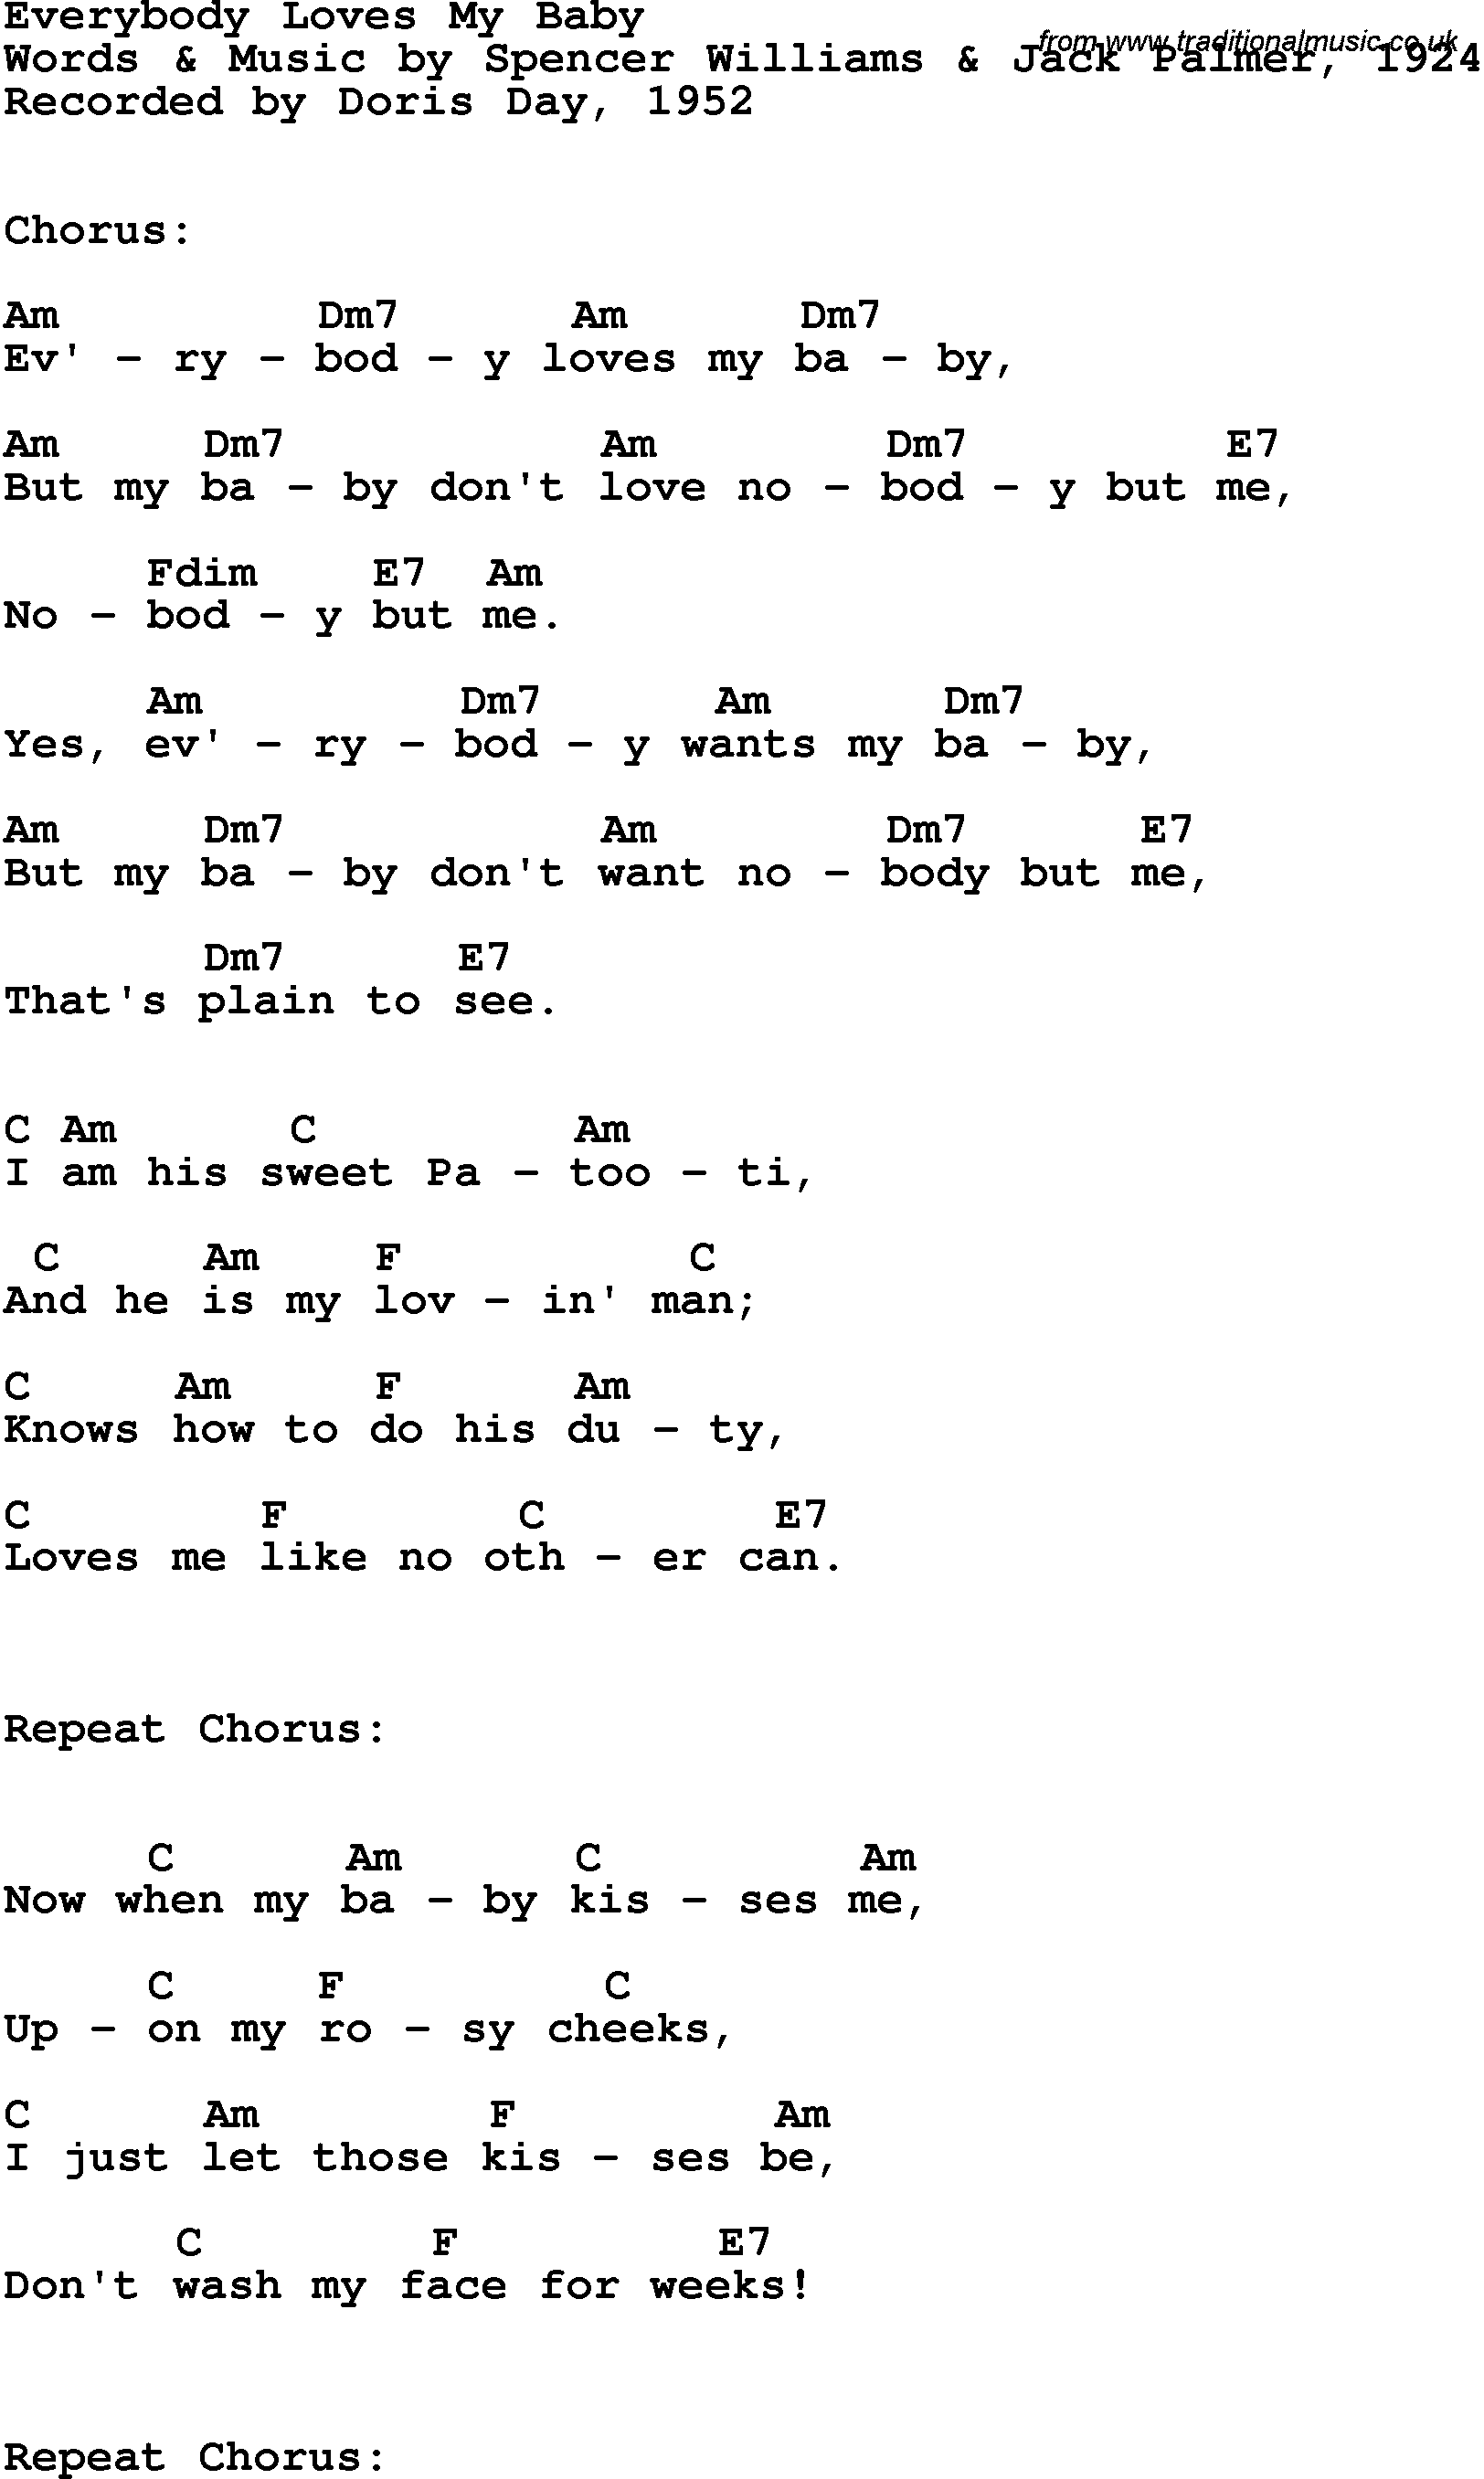 Song Lyrics with guitar chords for Everybody Loves My Baby - Doris Day, 1952